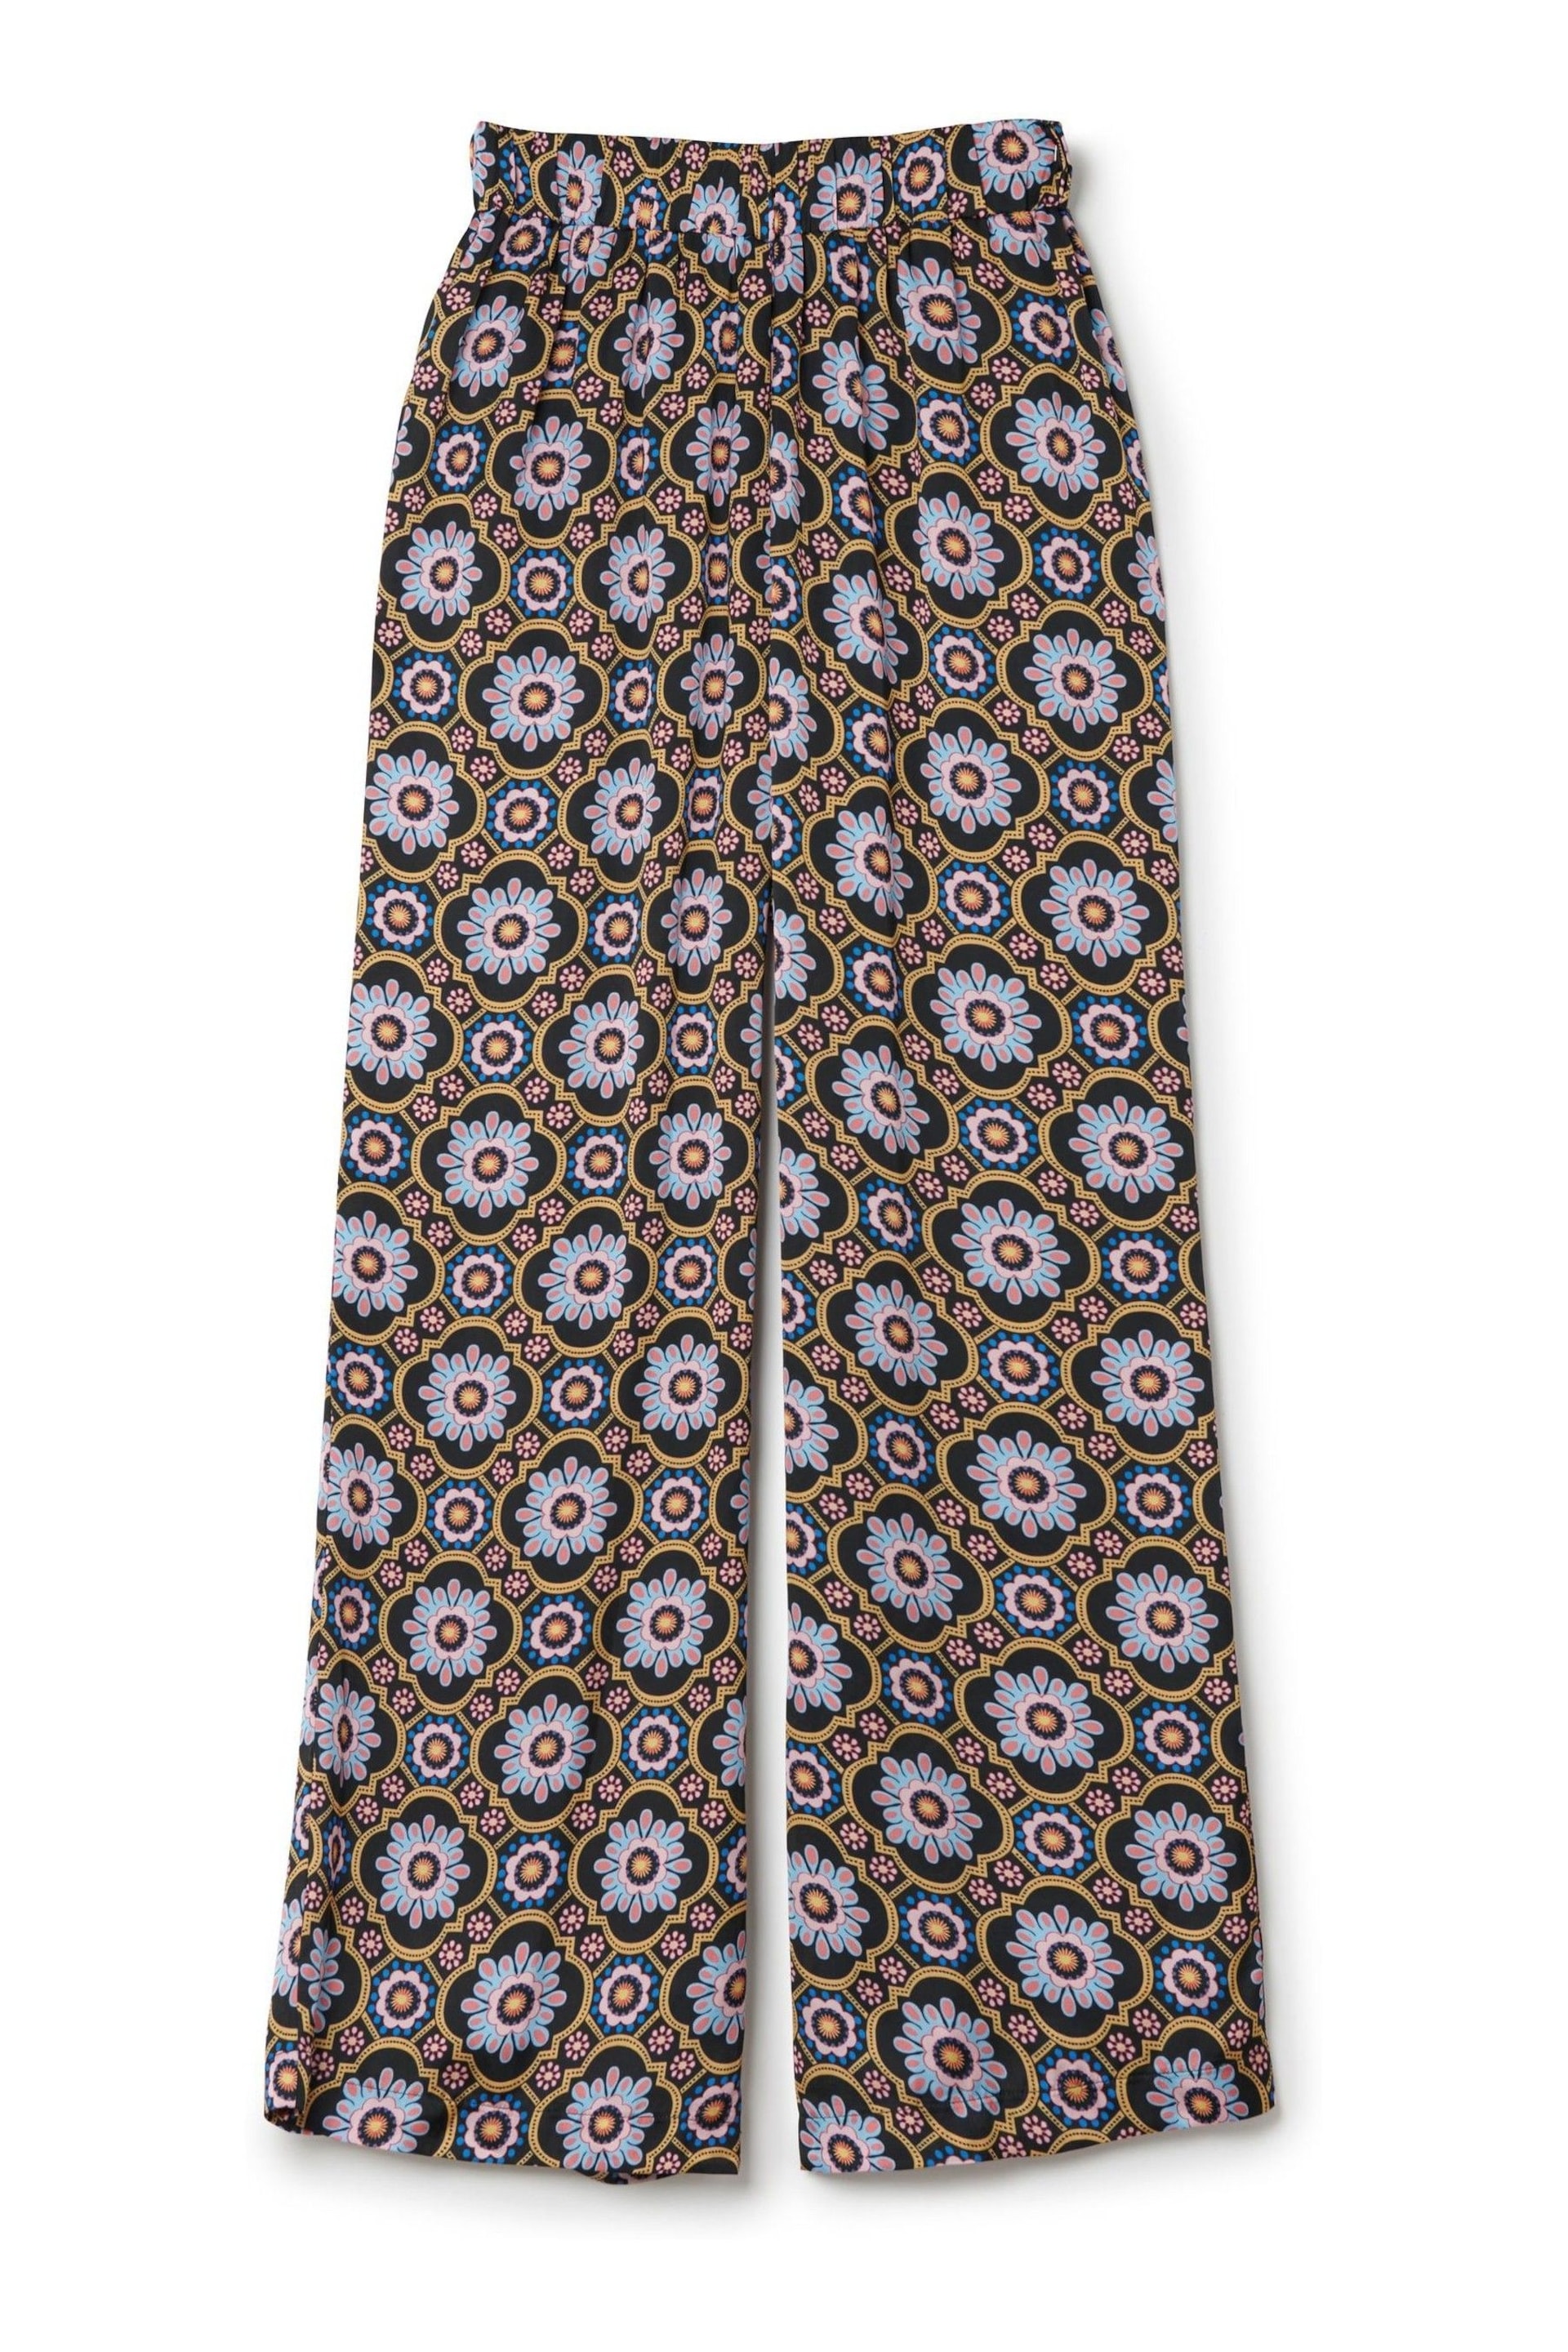 Another Sunday Satin Wide Leg Printed Trouser With Elasticated Waist In Print - Image 6 of 8